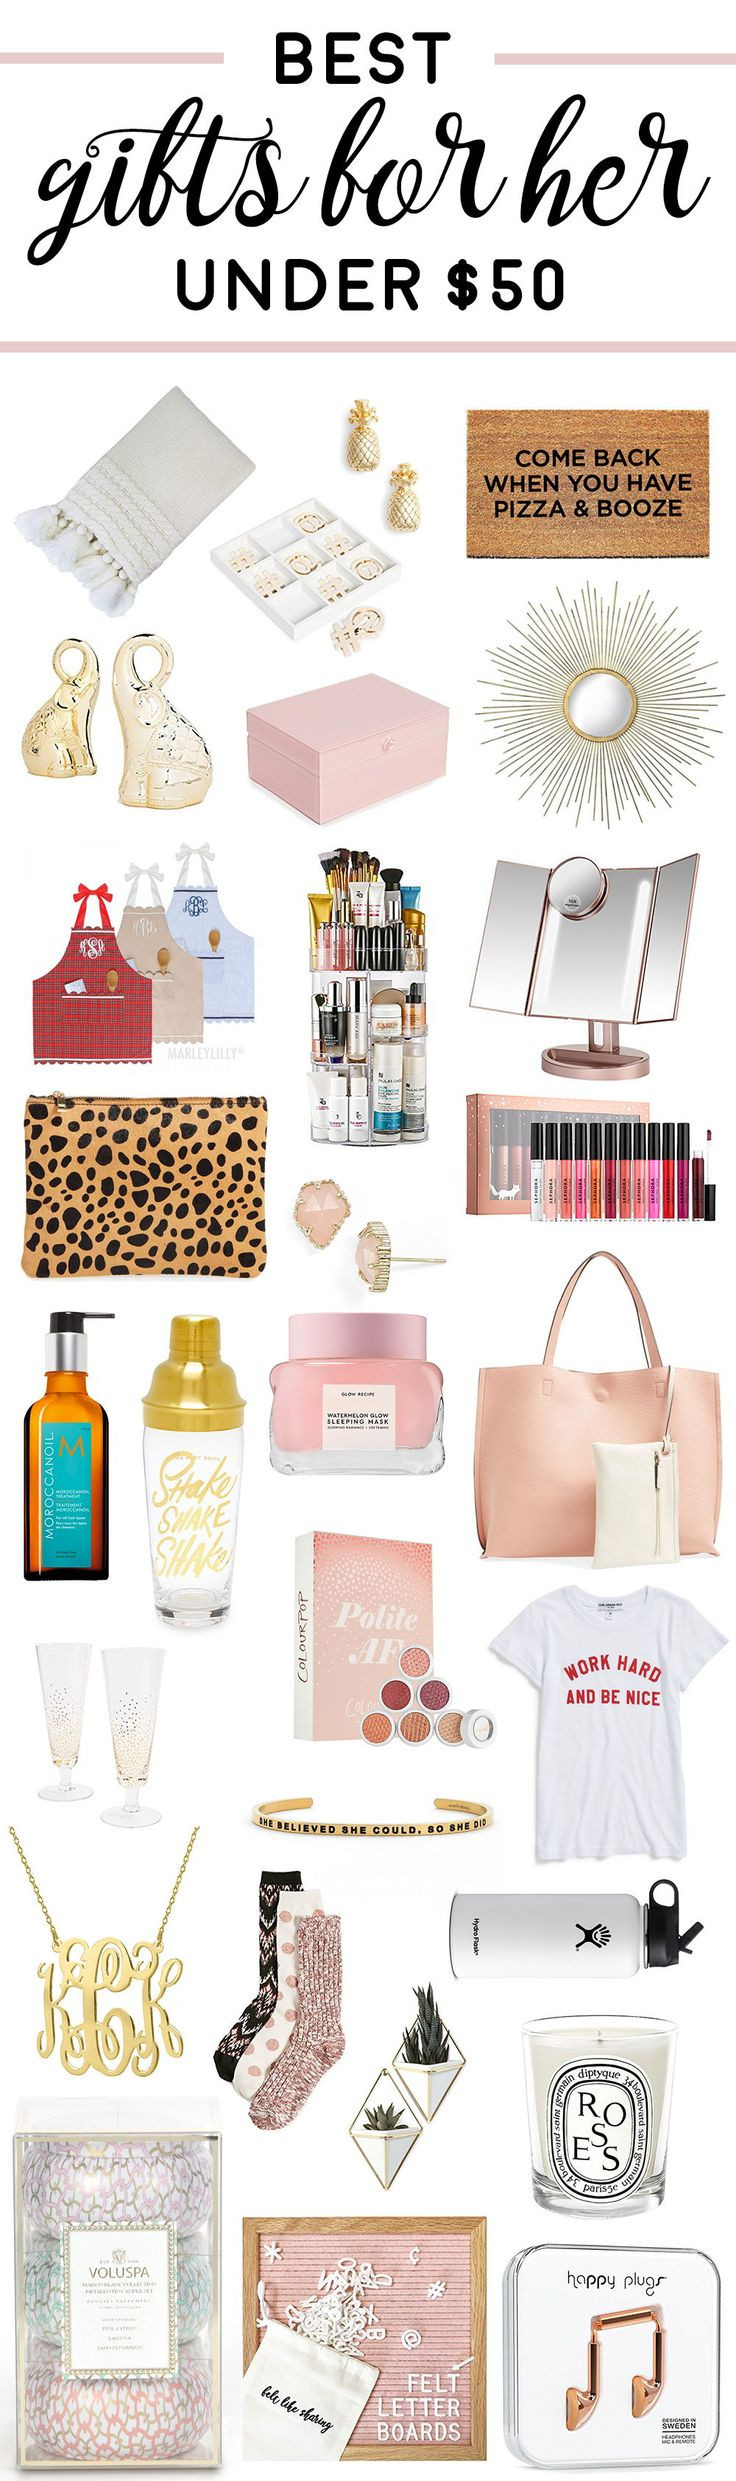 Girlfriend Gift Ideas Under $50
 Gifts for Women under $50 Over Two Dozen Items She ll